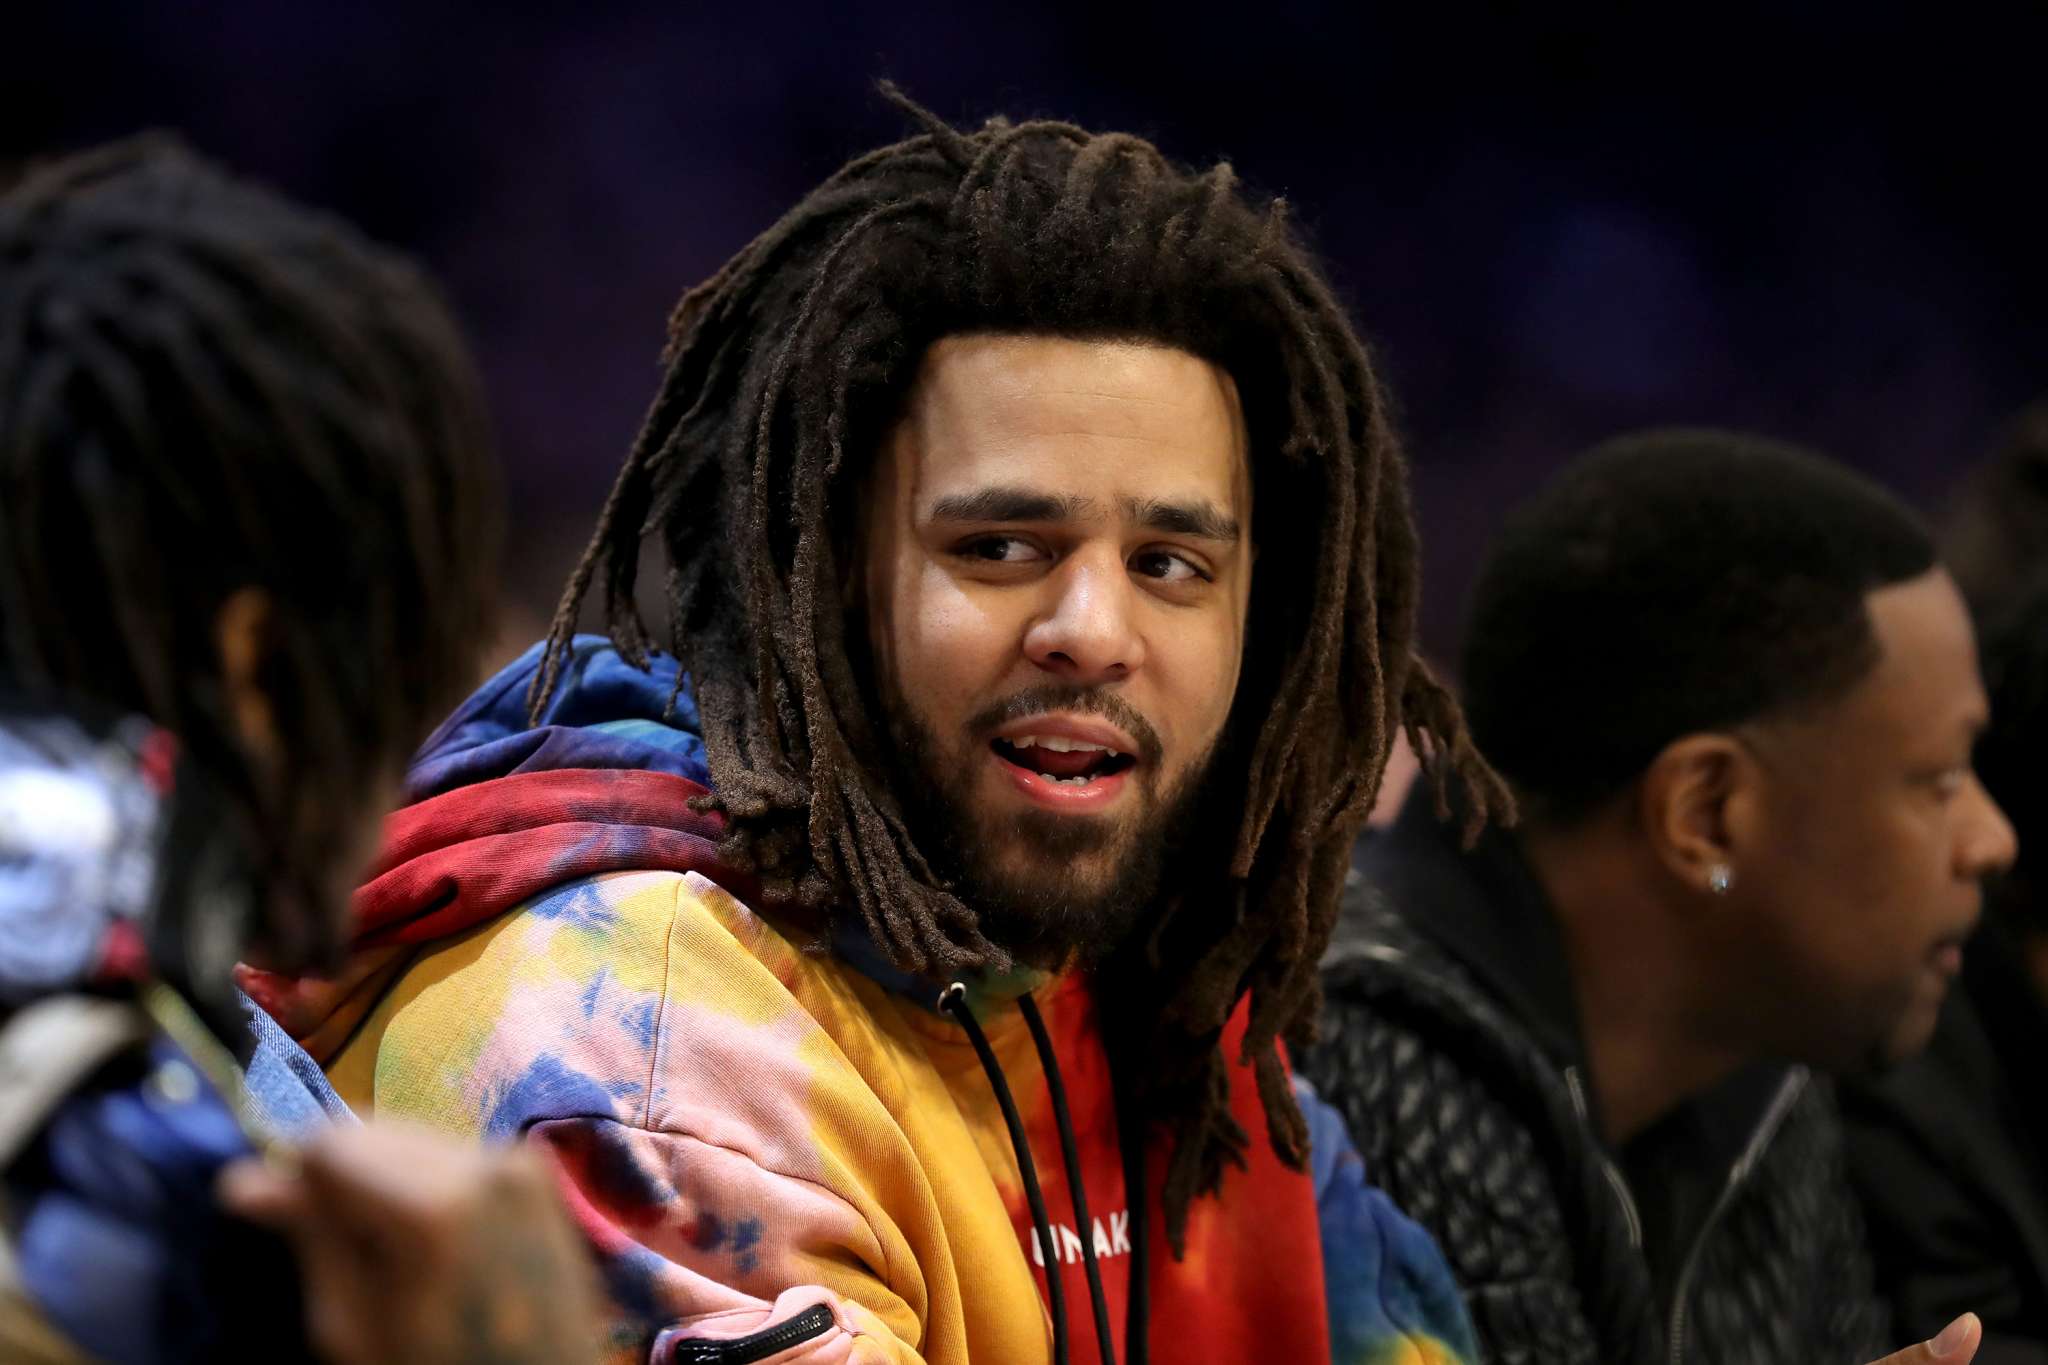 j-cole-is-heading-on-tour-and-basketball-future-looks-uncertain